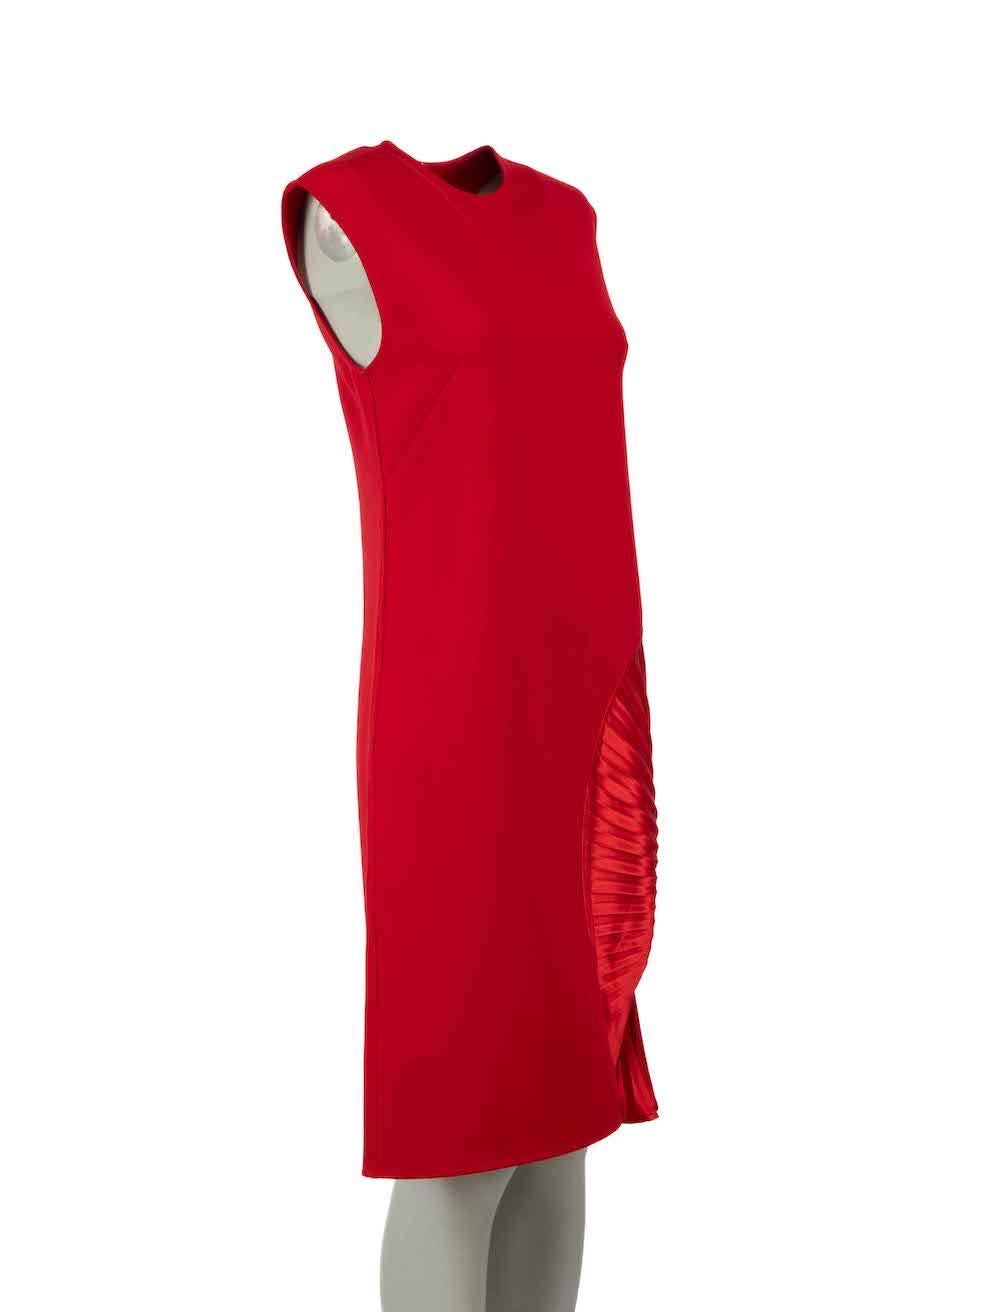 CONDITION is Never worn, with tags. No visible wear to dress is evident on this new Victoria Beckham designer resale item.
 
Details
Red
Synthetic
Dress
Pleated panel detail
Sleeveless
Round neck
Knee length
Back zip and hook fastening
 
Made in